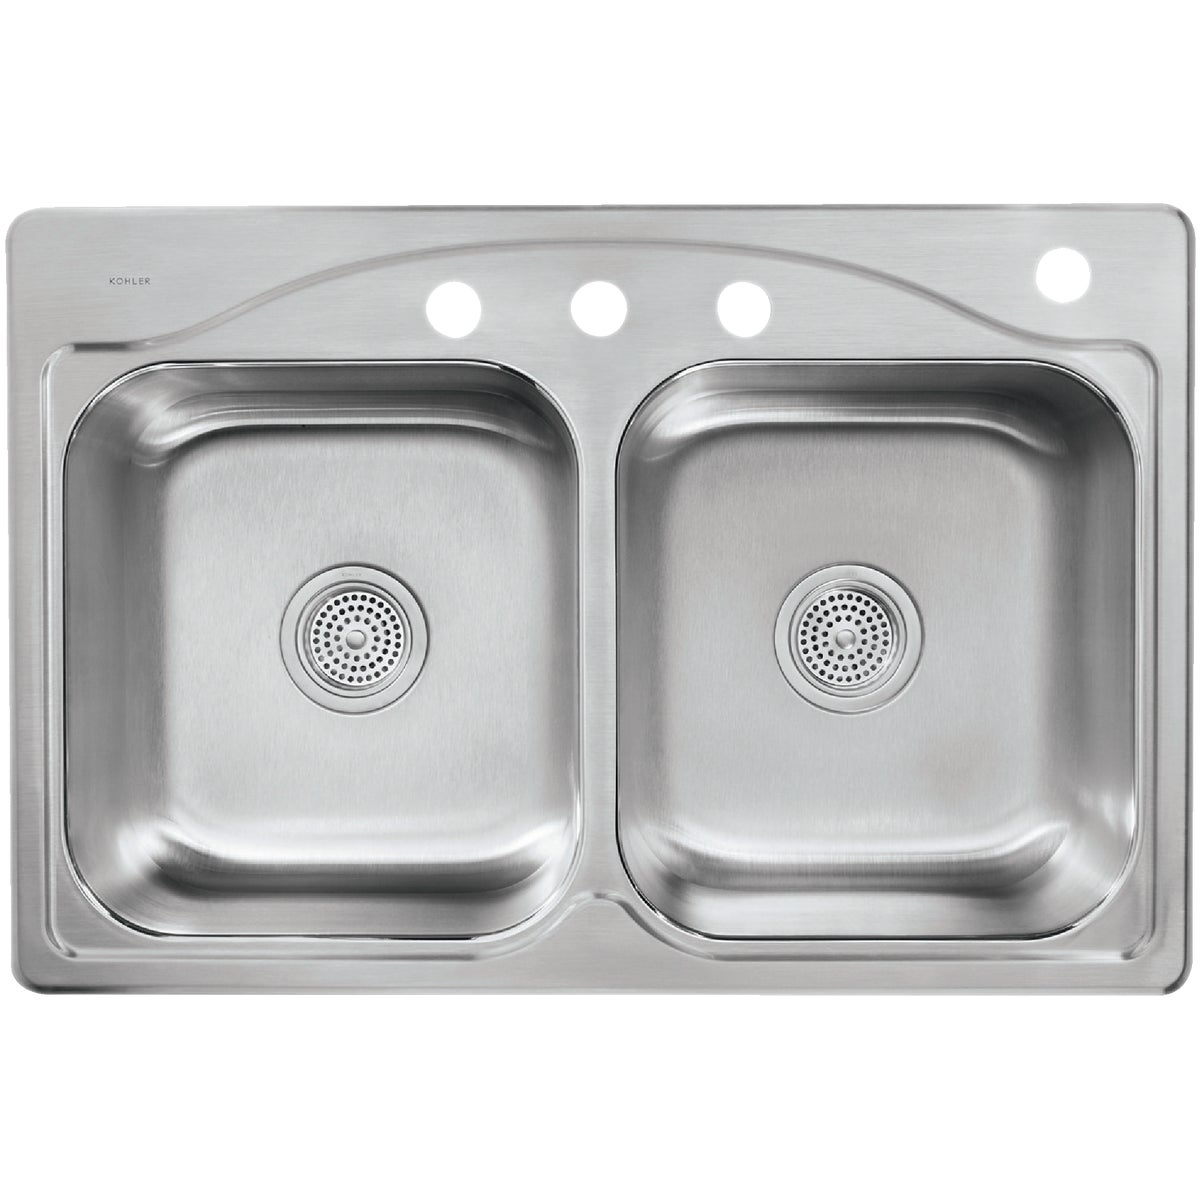 Kohler Cadence Double Bowl 33 In. x 22 In. x 8-5/16 In. Deep Stainless Steel Top Mount Kitchen Sink